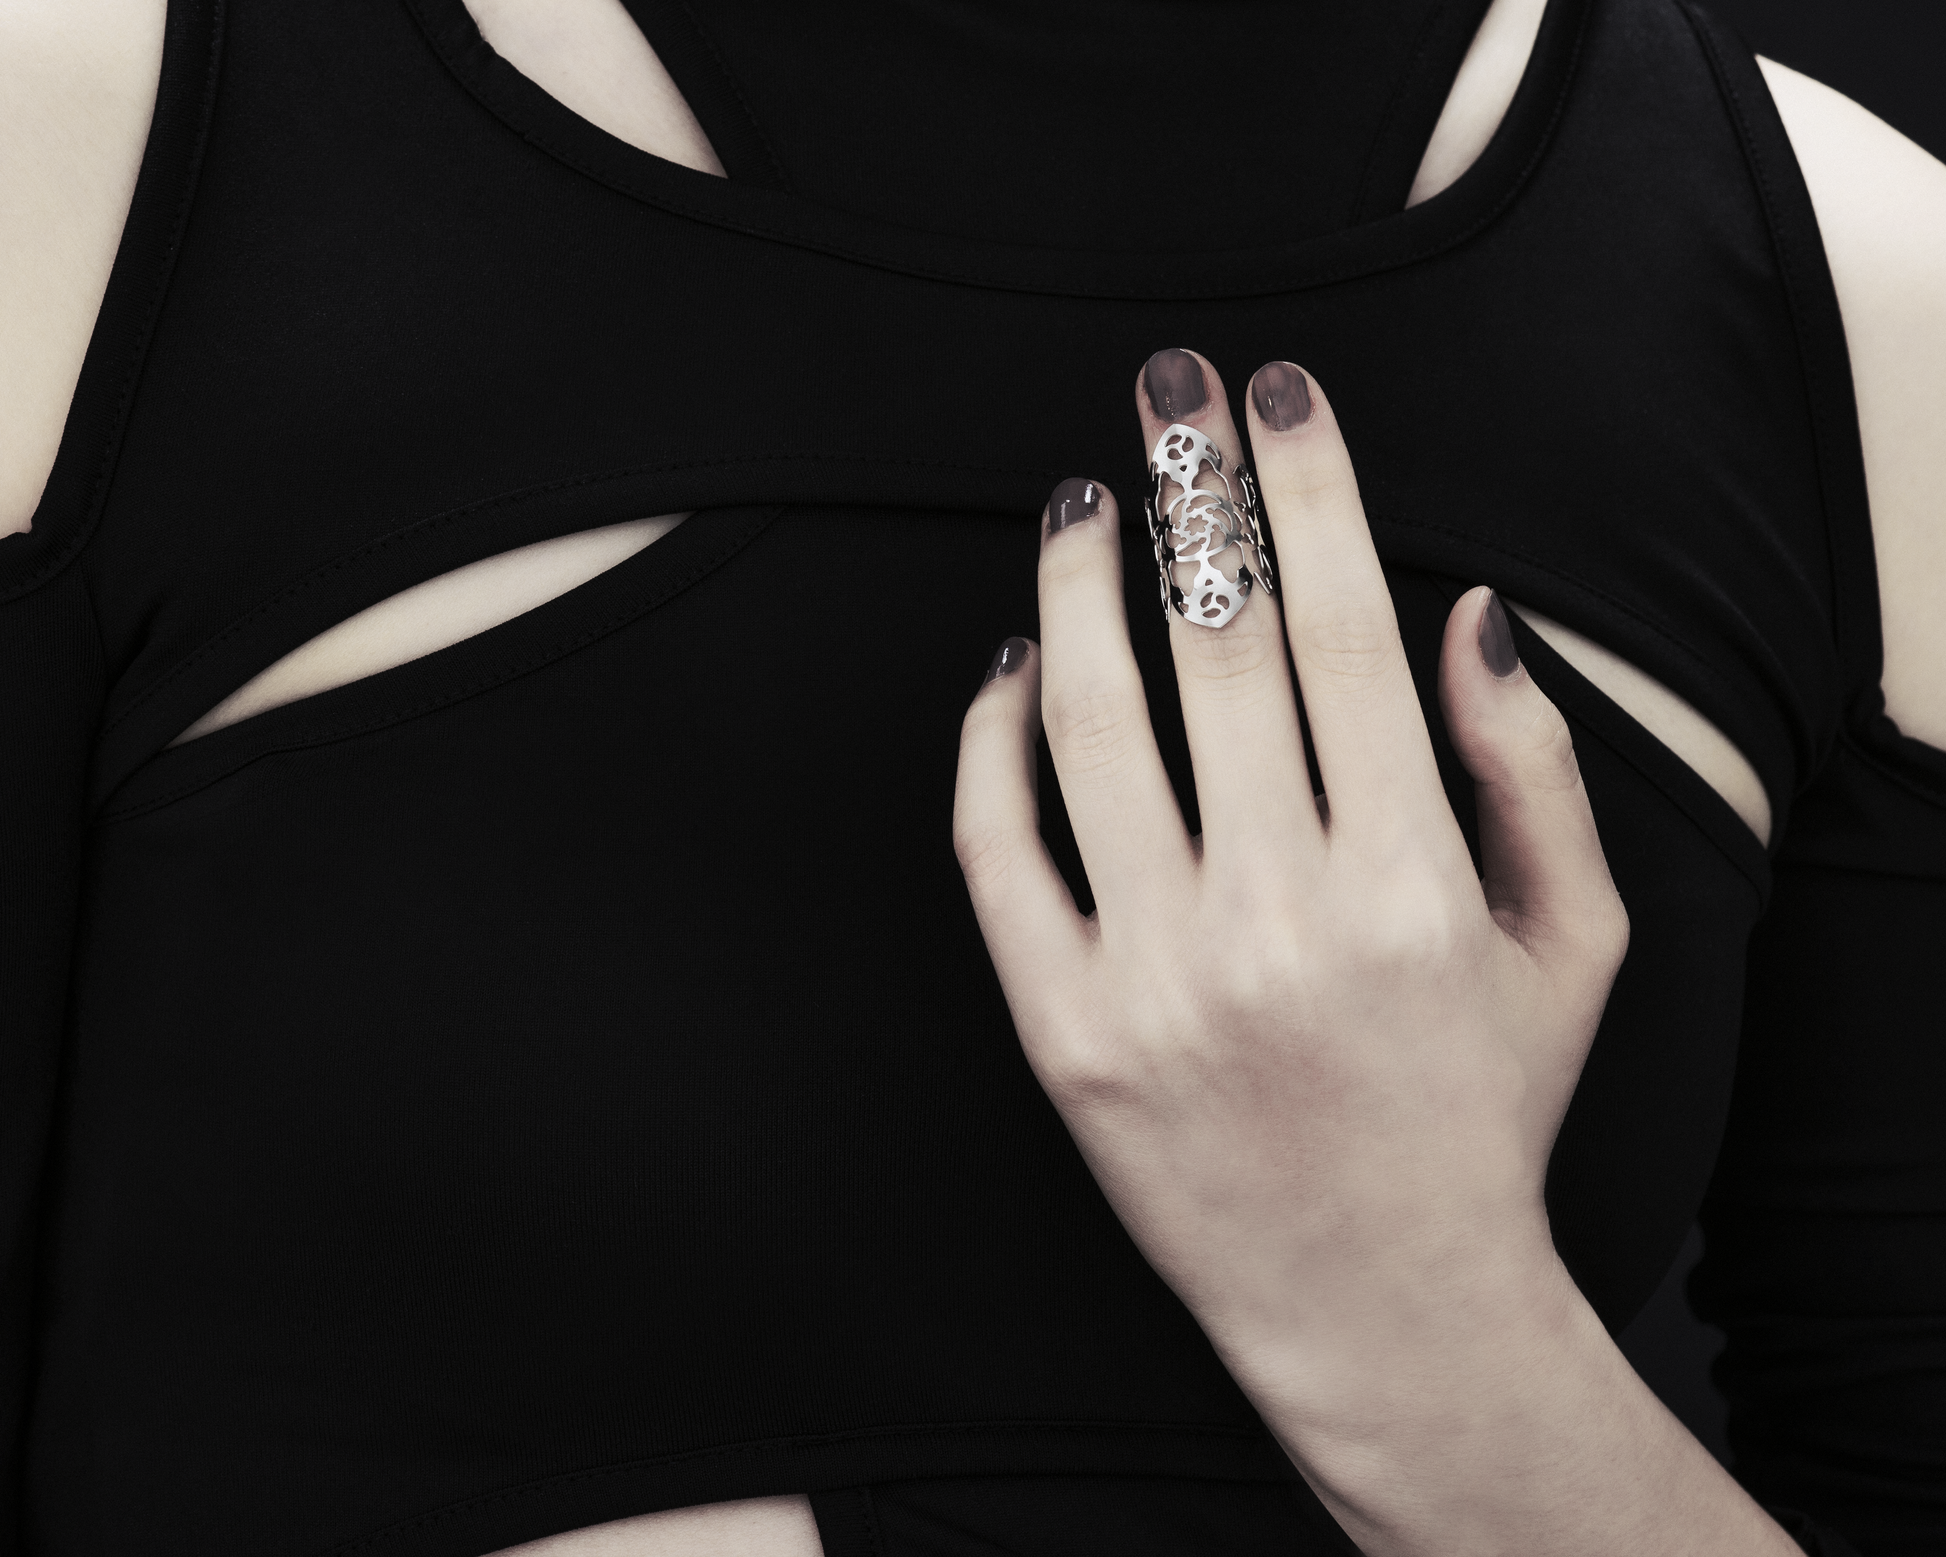 A hand adorned with a Myril Jewels gothic architecture inspired midi ring, set against a black sleeveless top with cut-out details. The ring’s intricate silver filigree design is reminiscent of the ornate complexity of gothic cathedrals, perfect for those who appreciate the dark-avantgarde, neo-goth aesthetic. This piece is a staple for gothic-chic fashion, a subtle nod to whimsigoth and witchcore styles, and an ideal accessory for Halloween, everyday wear